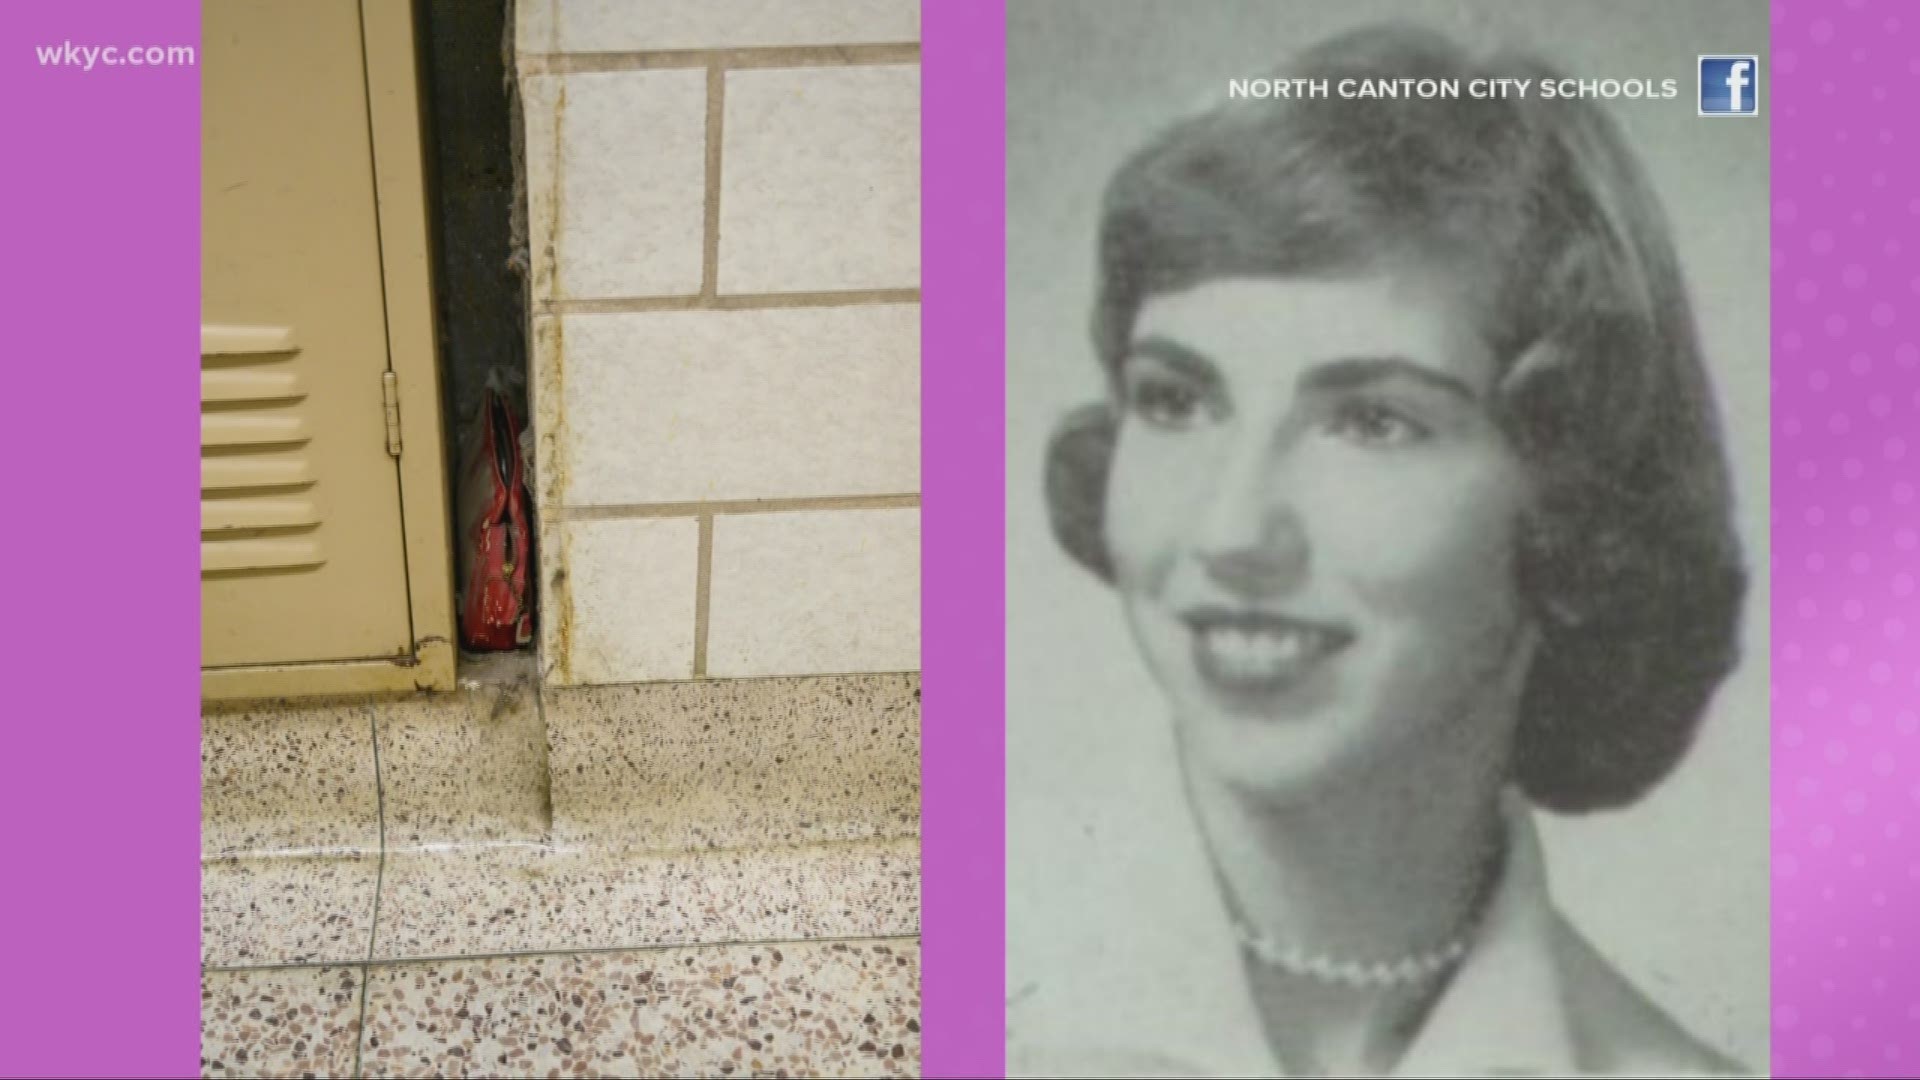 Purse found in North Canton middle school decades after it was